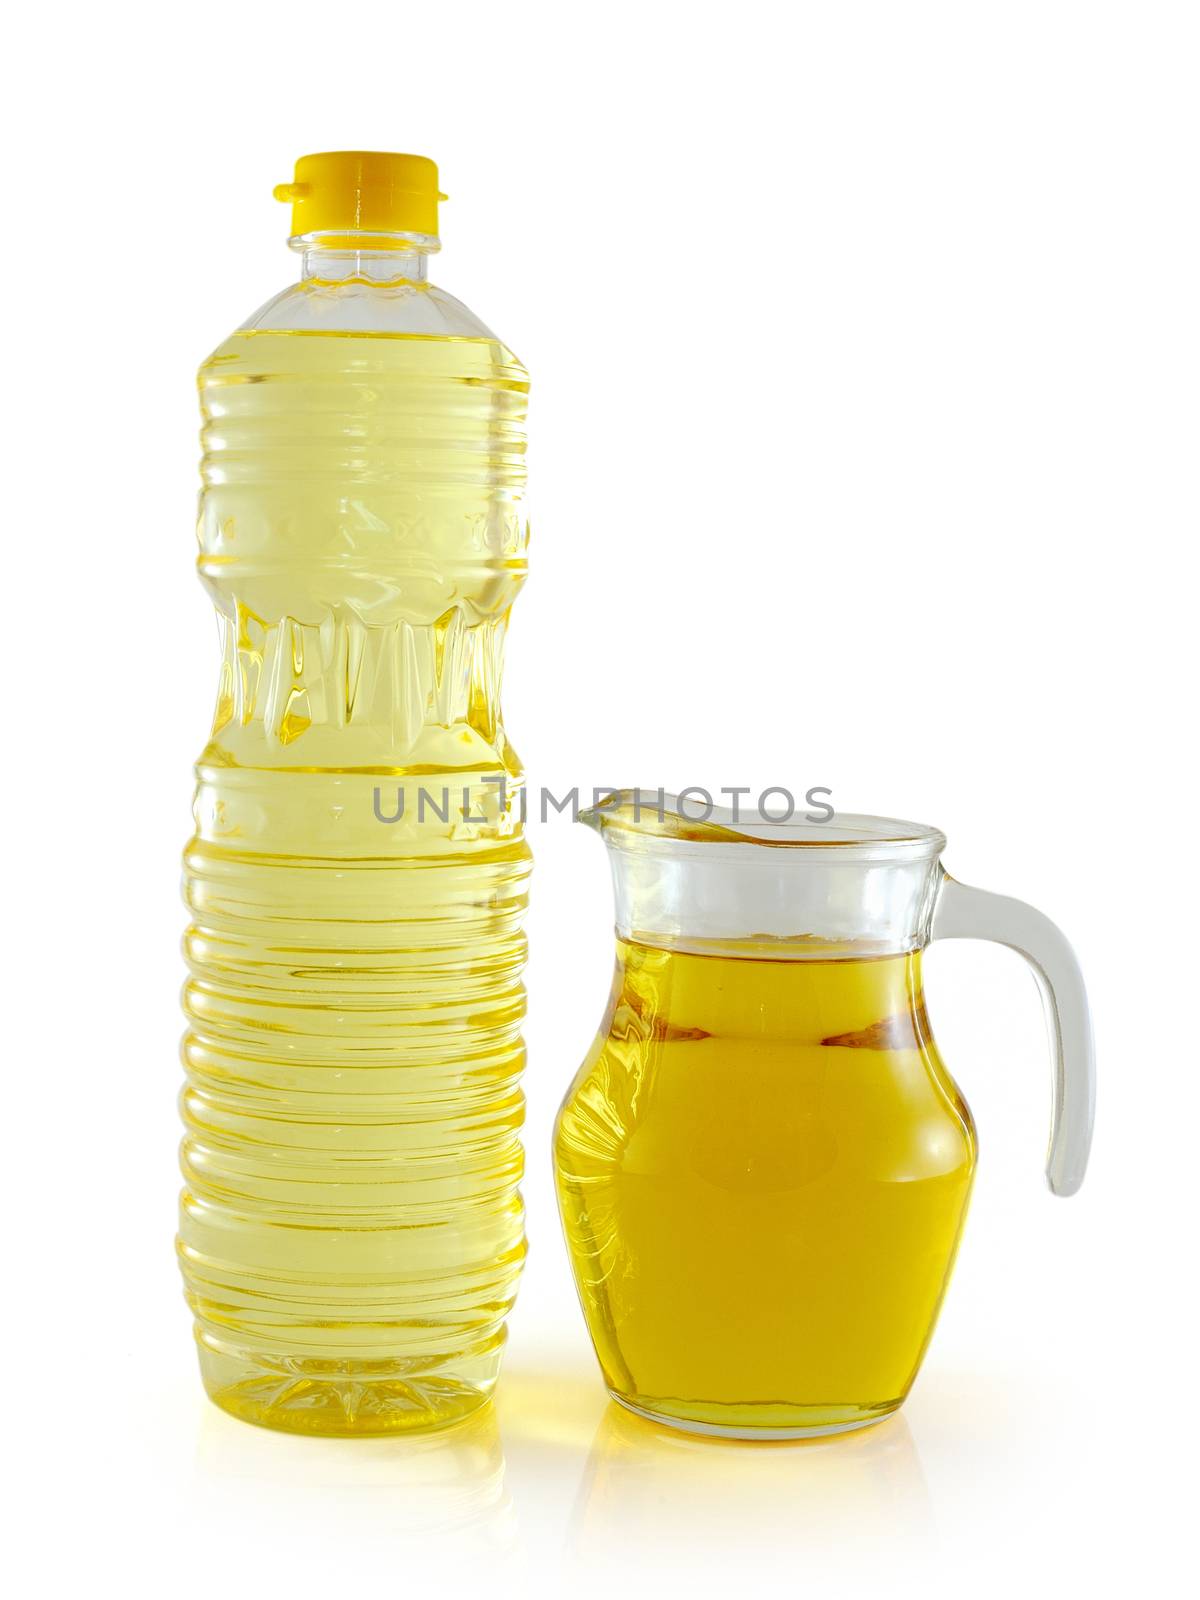 vegetable oil in a plastic bottle and jar on white background